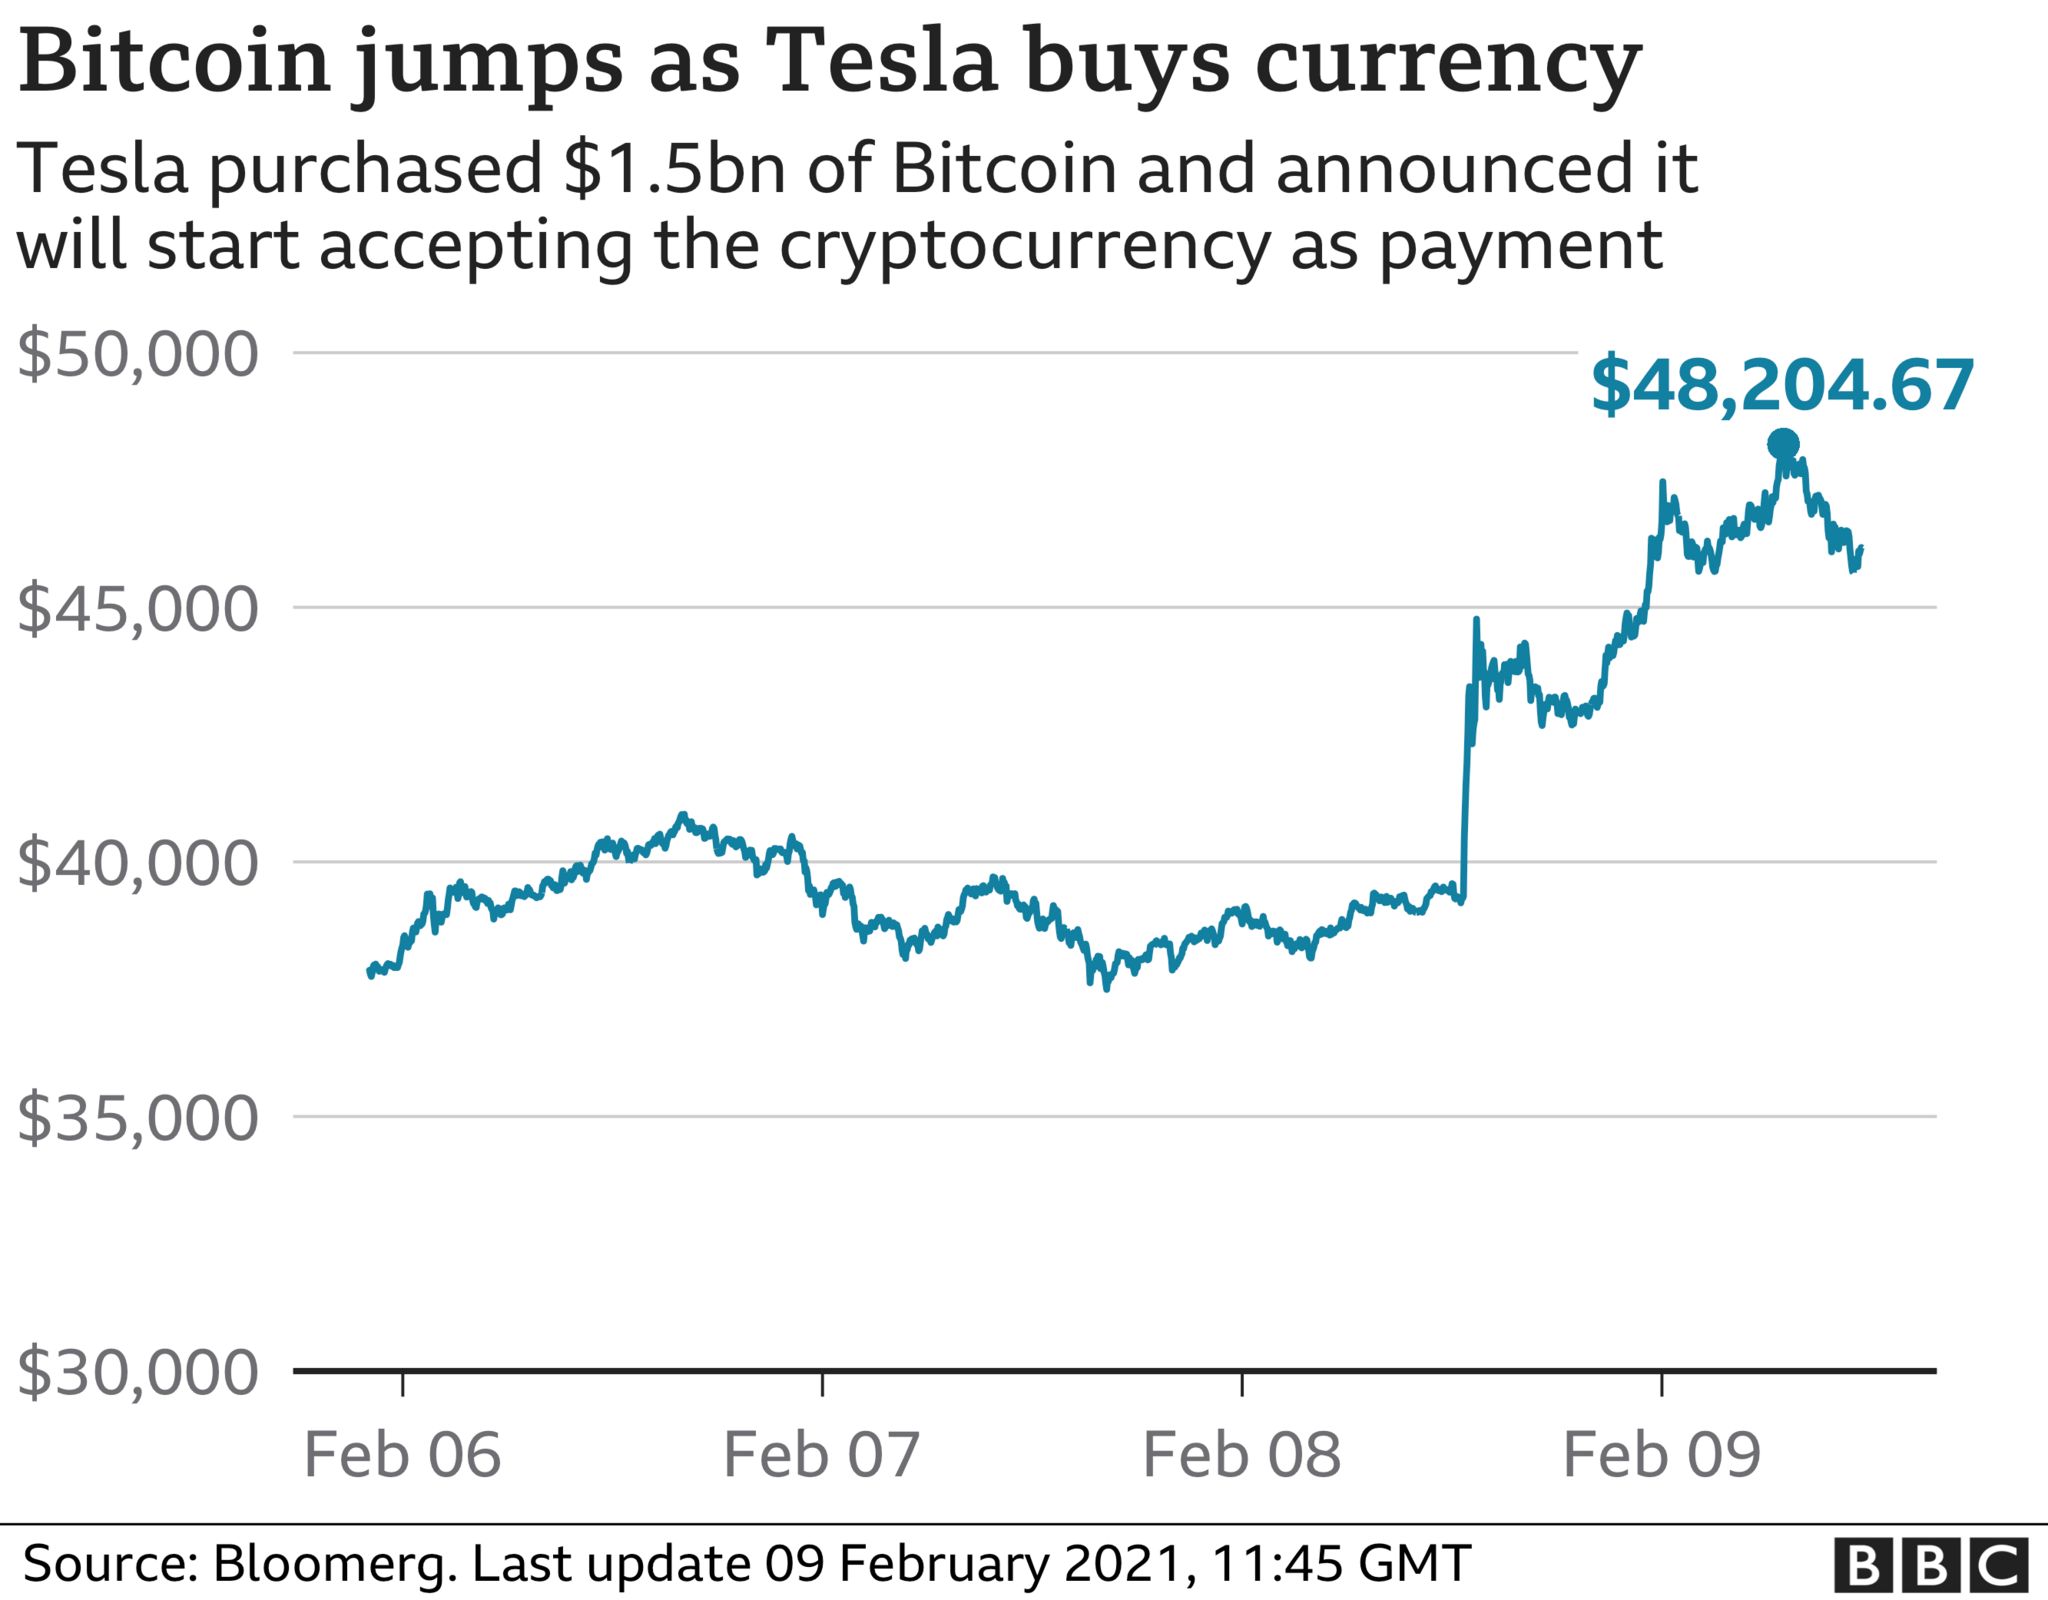 Bitcoin sets fresh records after Elon Musk investment - BBC News